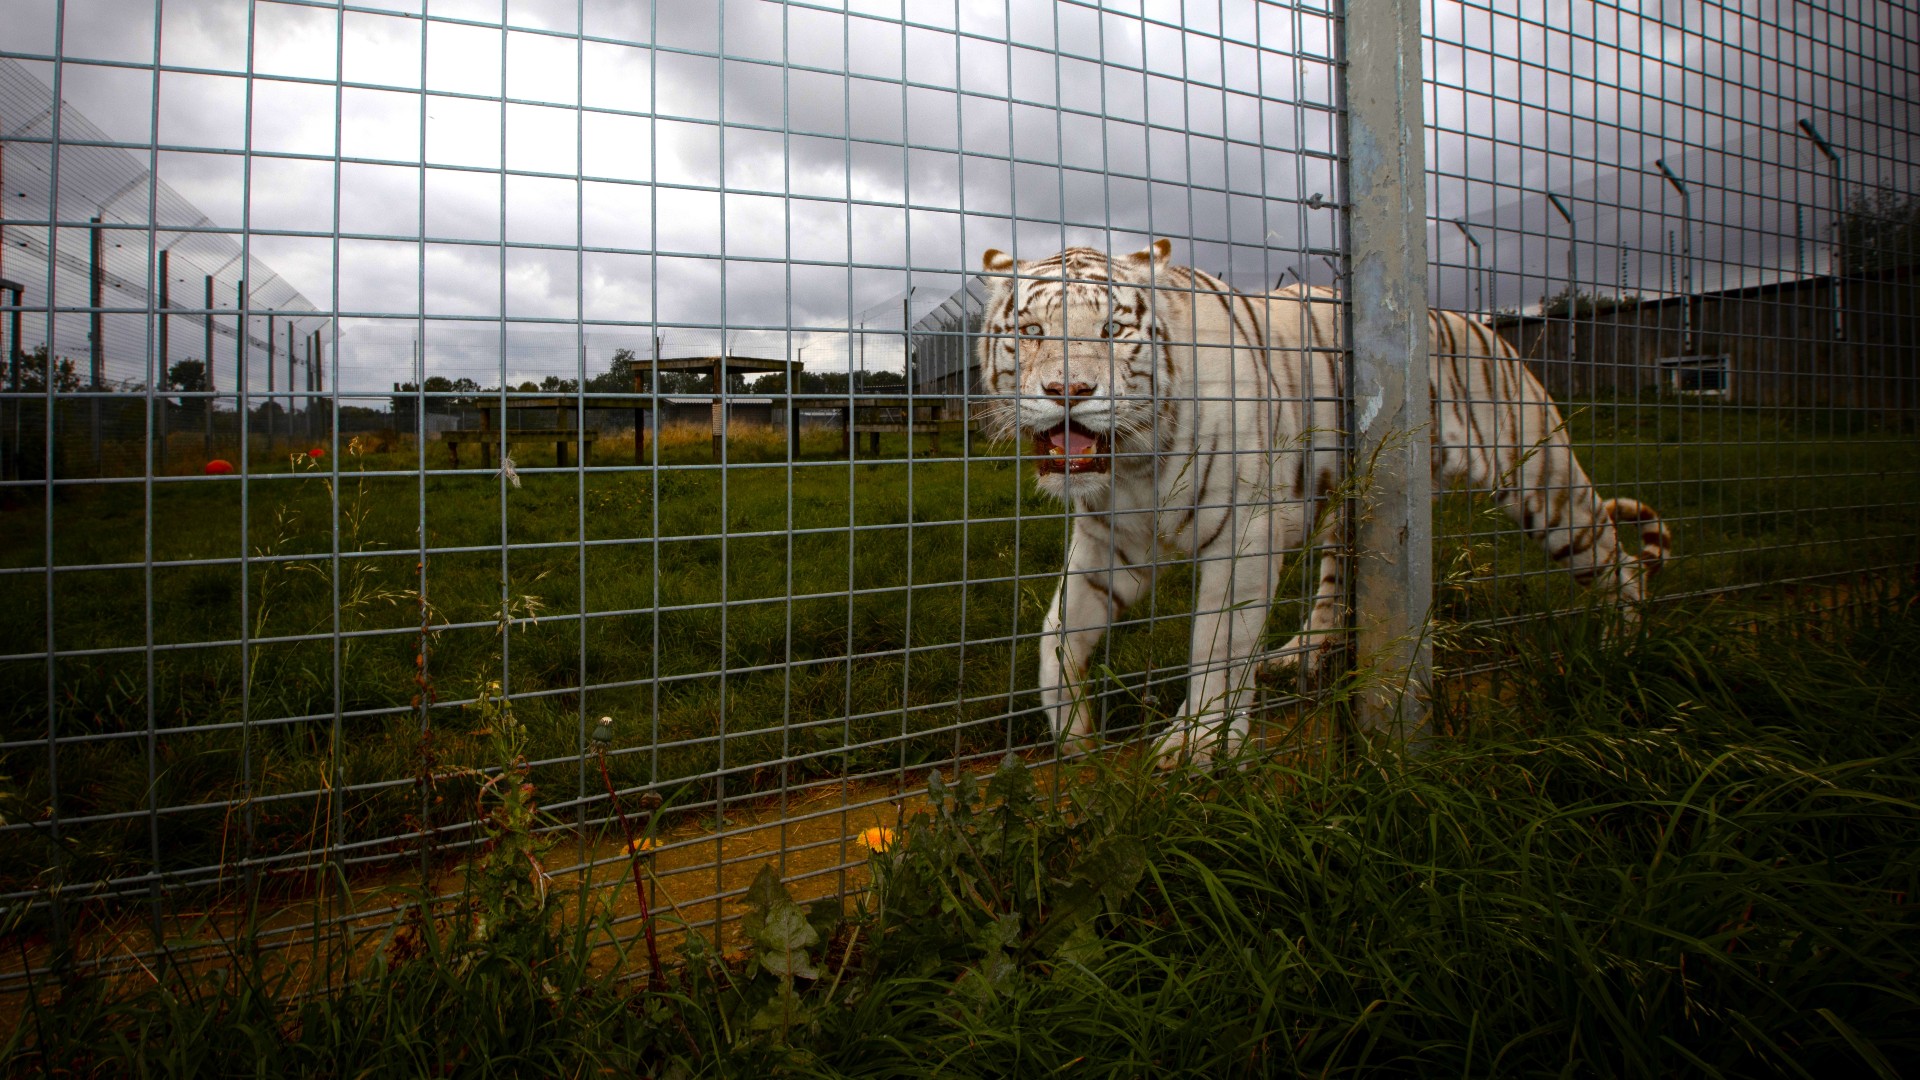 A white tiger in a zoo enclosure